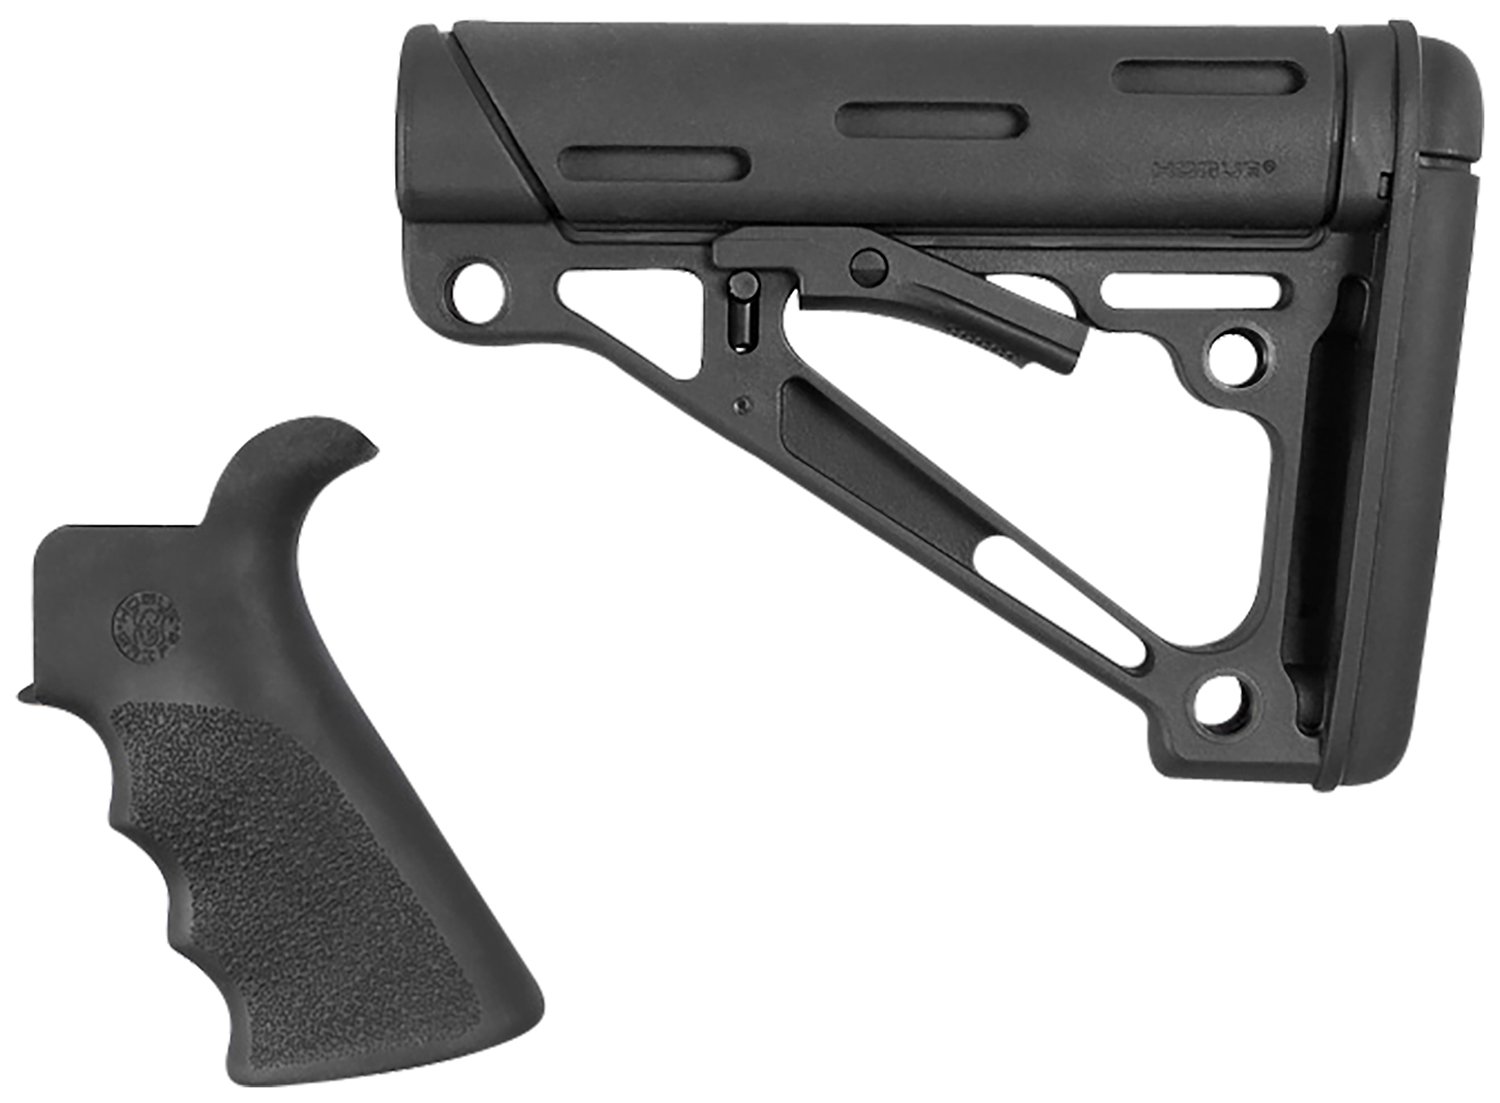 Hogue 15055 Overmolded Combo Kit Black Synthetic With Rubber Overmold, Collapsible Stock, Beavertail Grip With Finger Gr